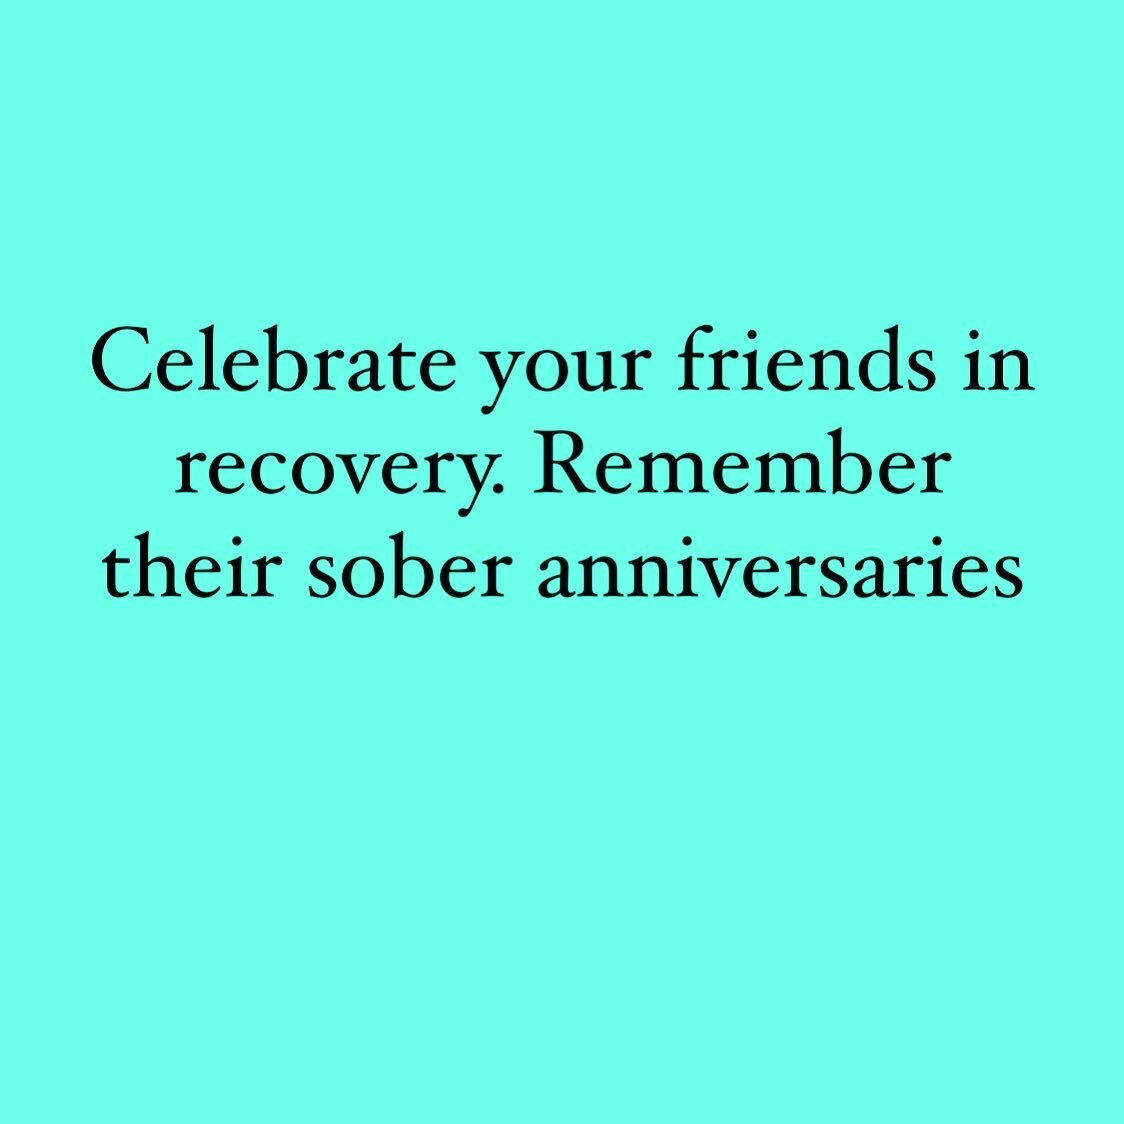 Today I get to celebrate the sober anniversary of one of my dearest friends. People who are in recovery from an addiction are some of the most influential and trustworthy people in my life. Their journeys in recovery have saved lives - not just their